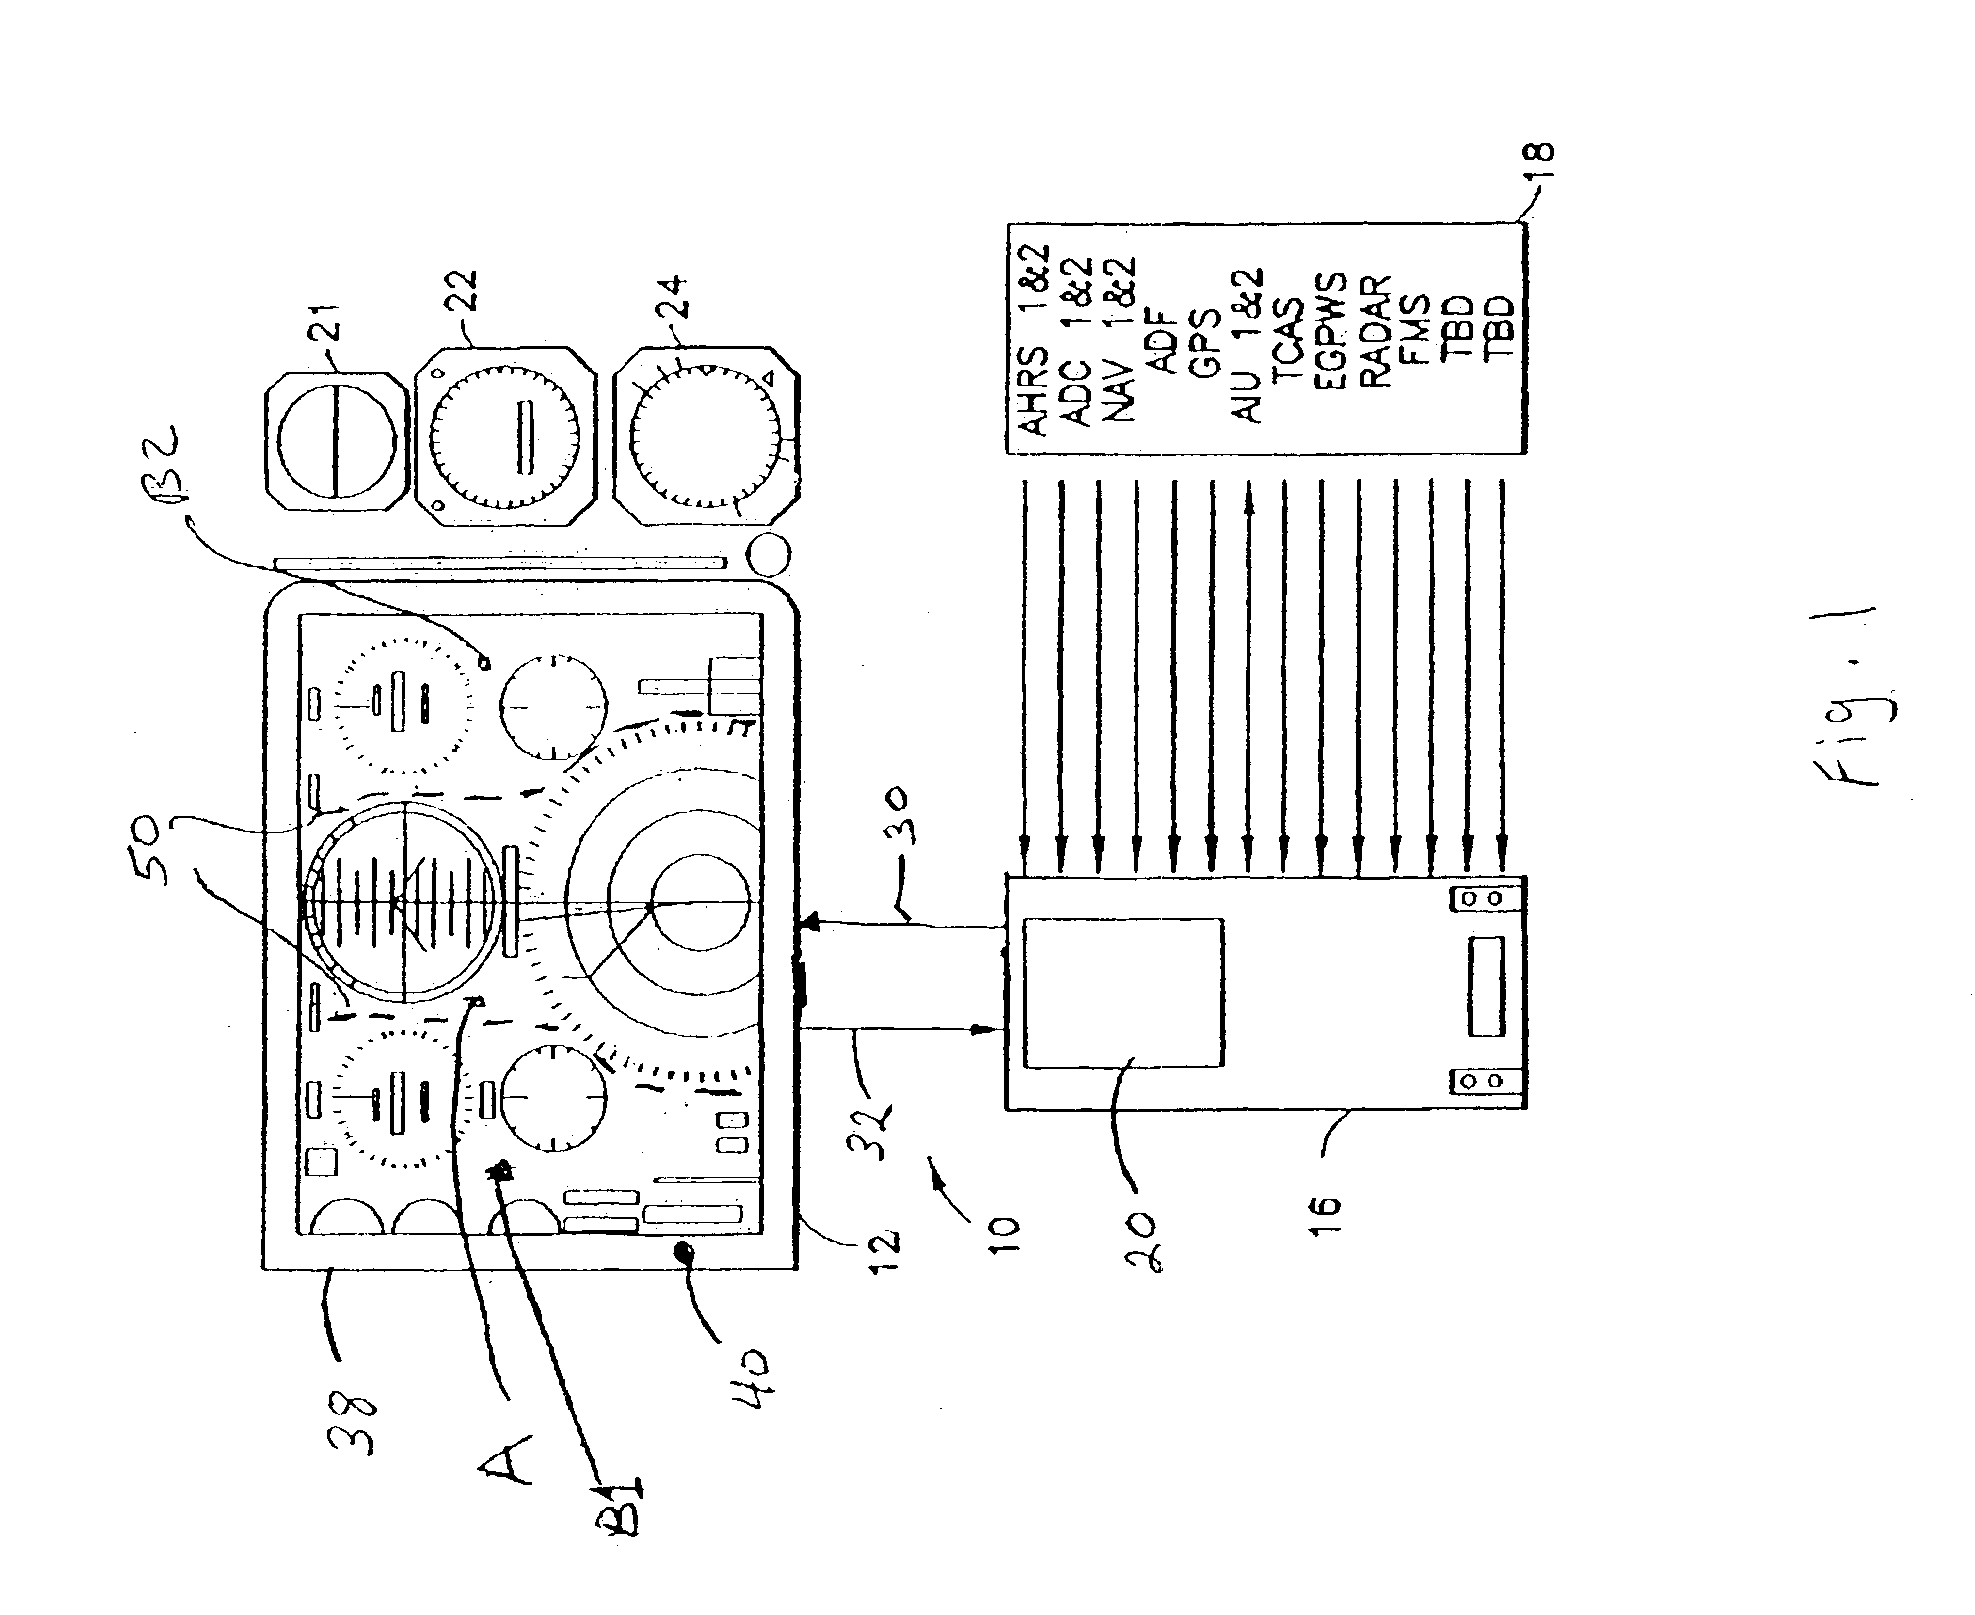 Method and apparatus for facilitating ease of viewing and interpretation of data concurrently presented to the flight crew on a multifunction flat panel display in an aircraft